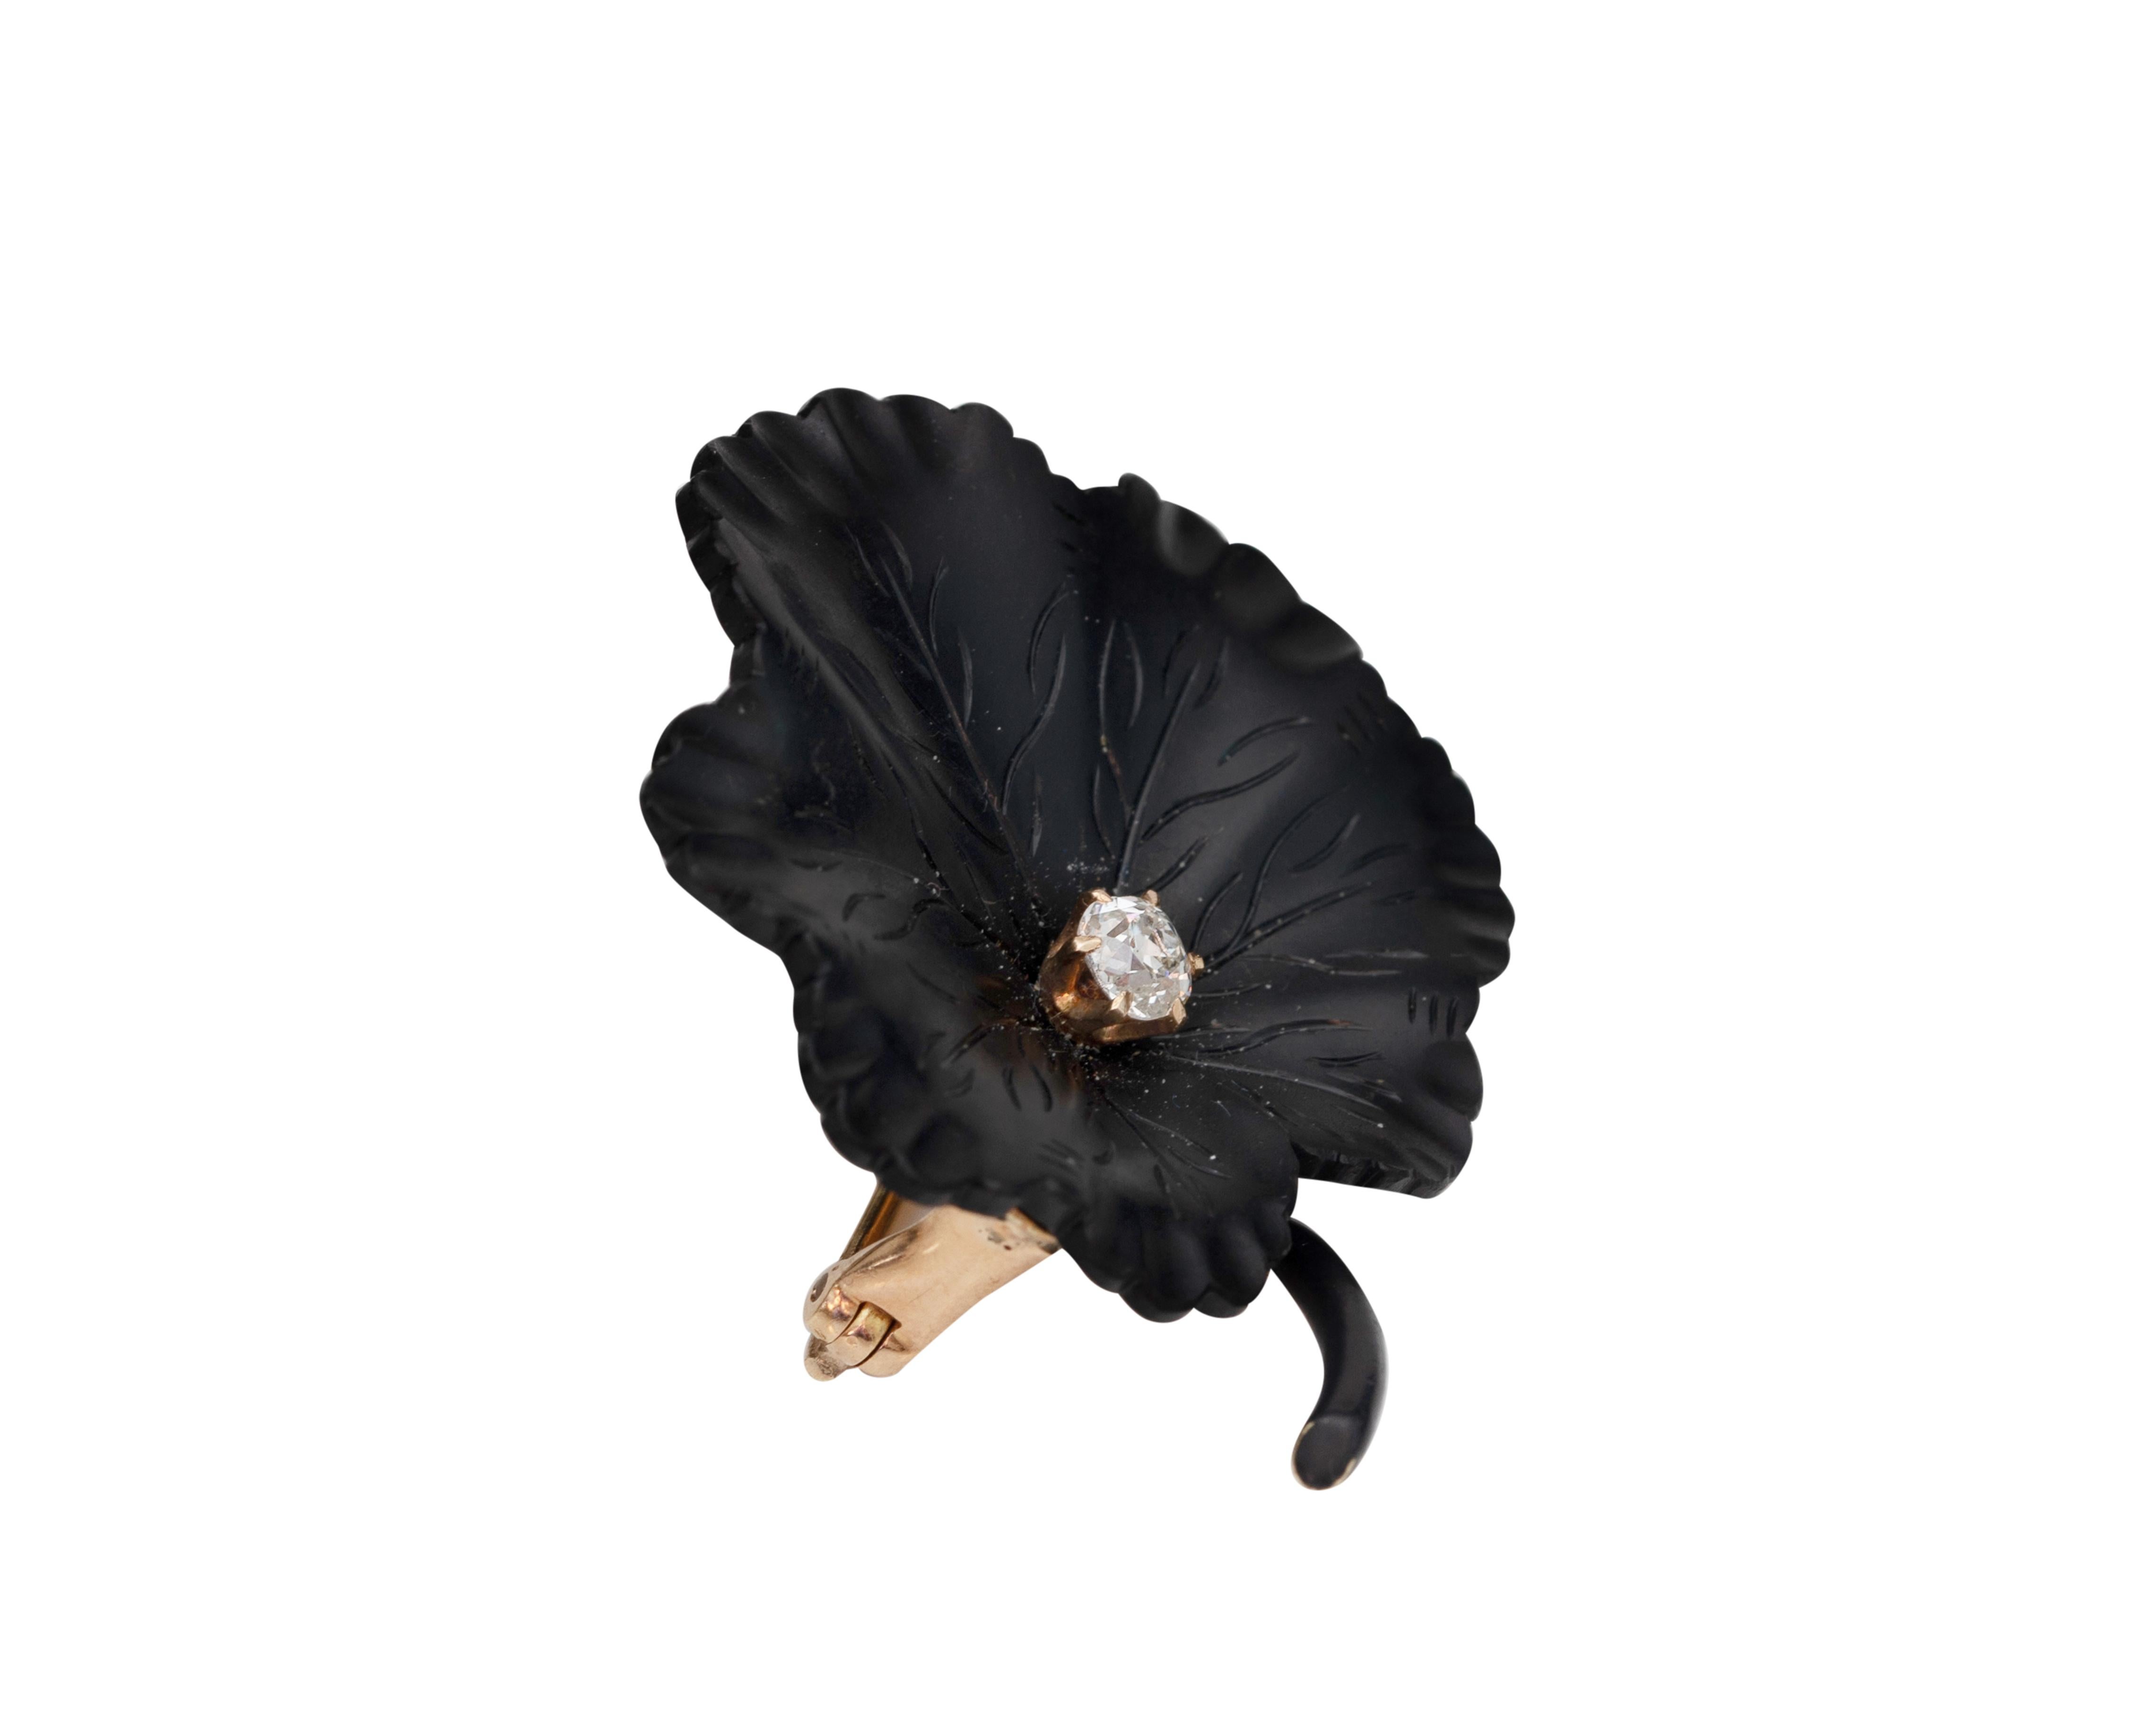 Pin Details:
Metal type: 14 Karat Yellow Gold
Weight: 8.13 grams
Measures: 1.5 inch length and width 

Diamond Details: 
Cut: Old Miner
Carat: .5 carat (1 count)
Color: F
Clarity: VS

Onyx Details: Black Onyx that has been carved 

Stunning 3-Leaf